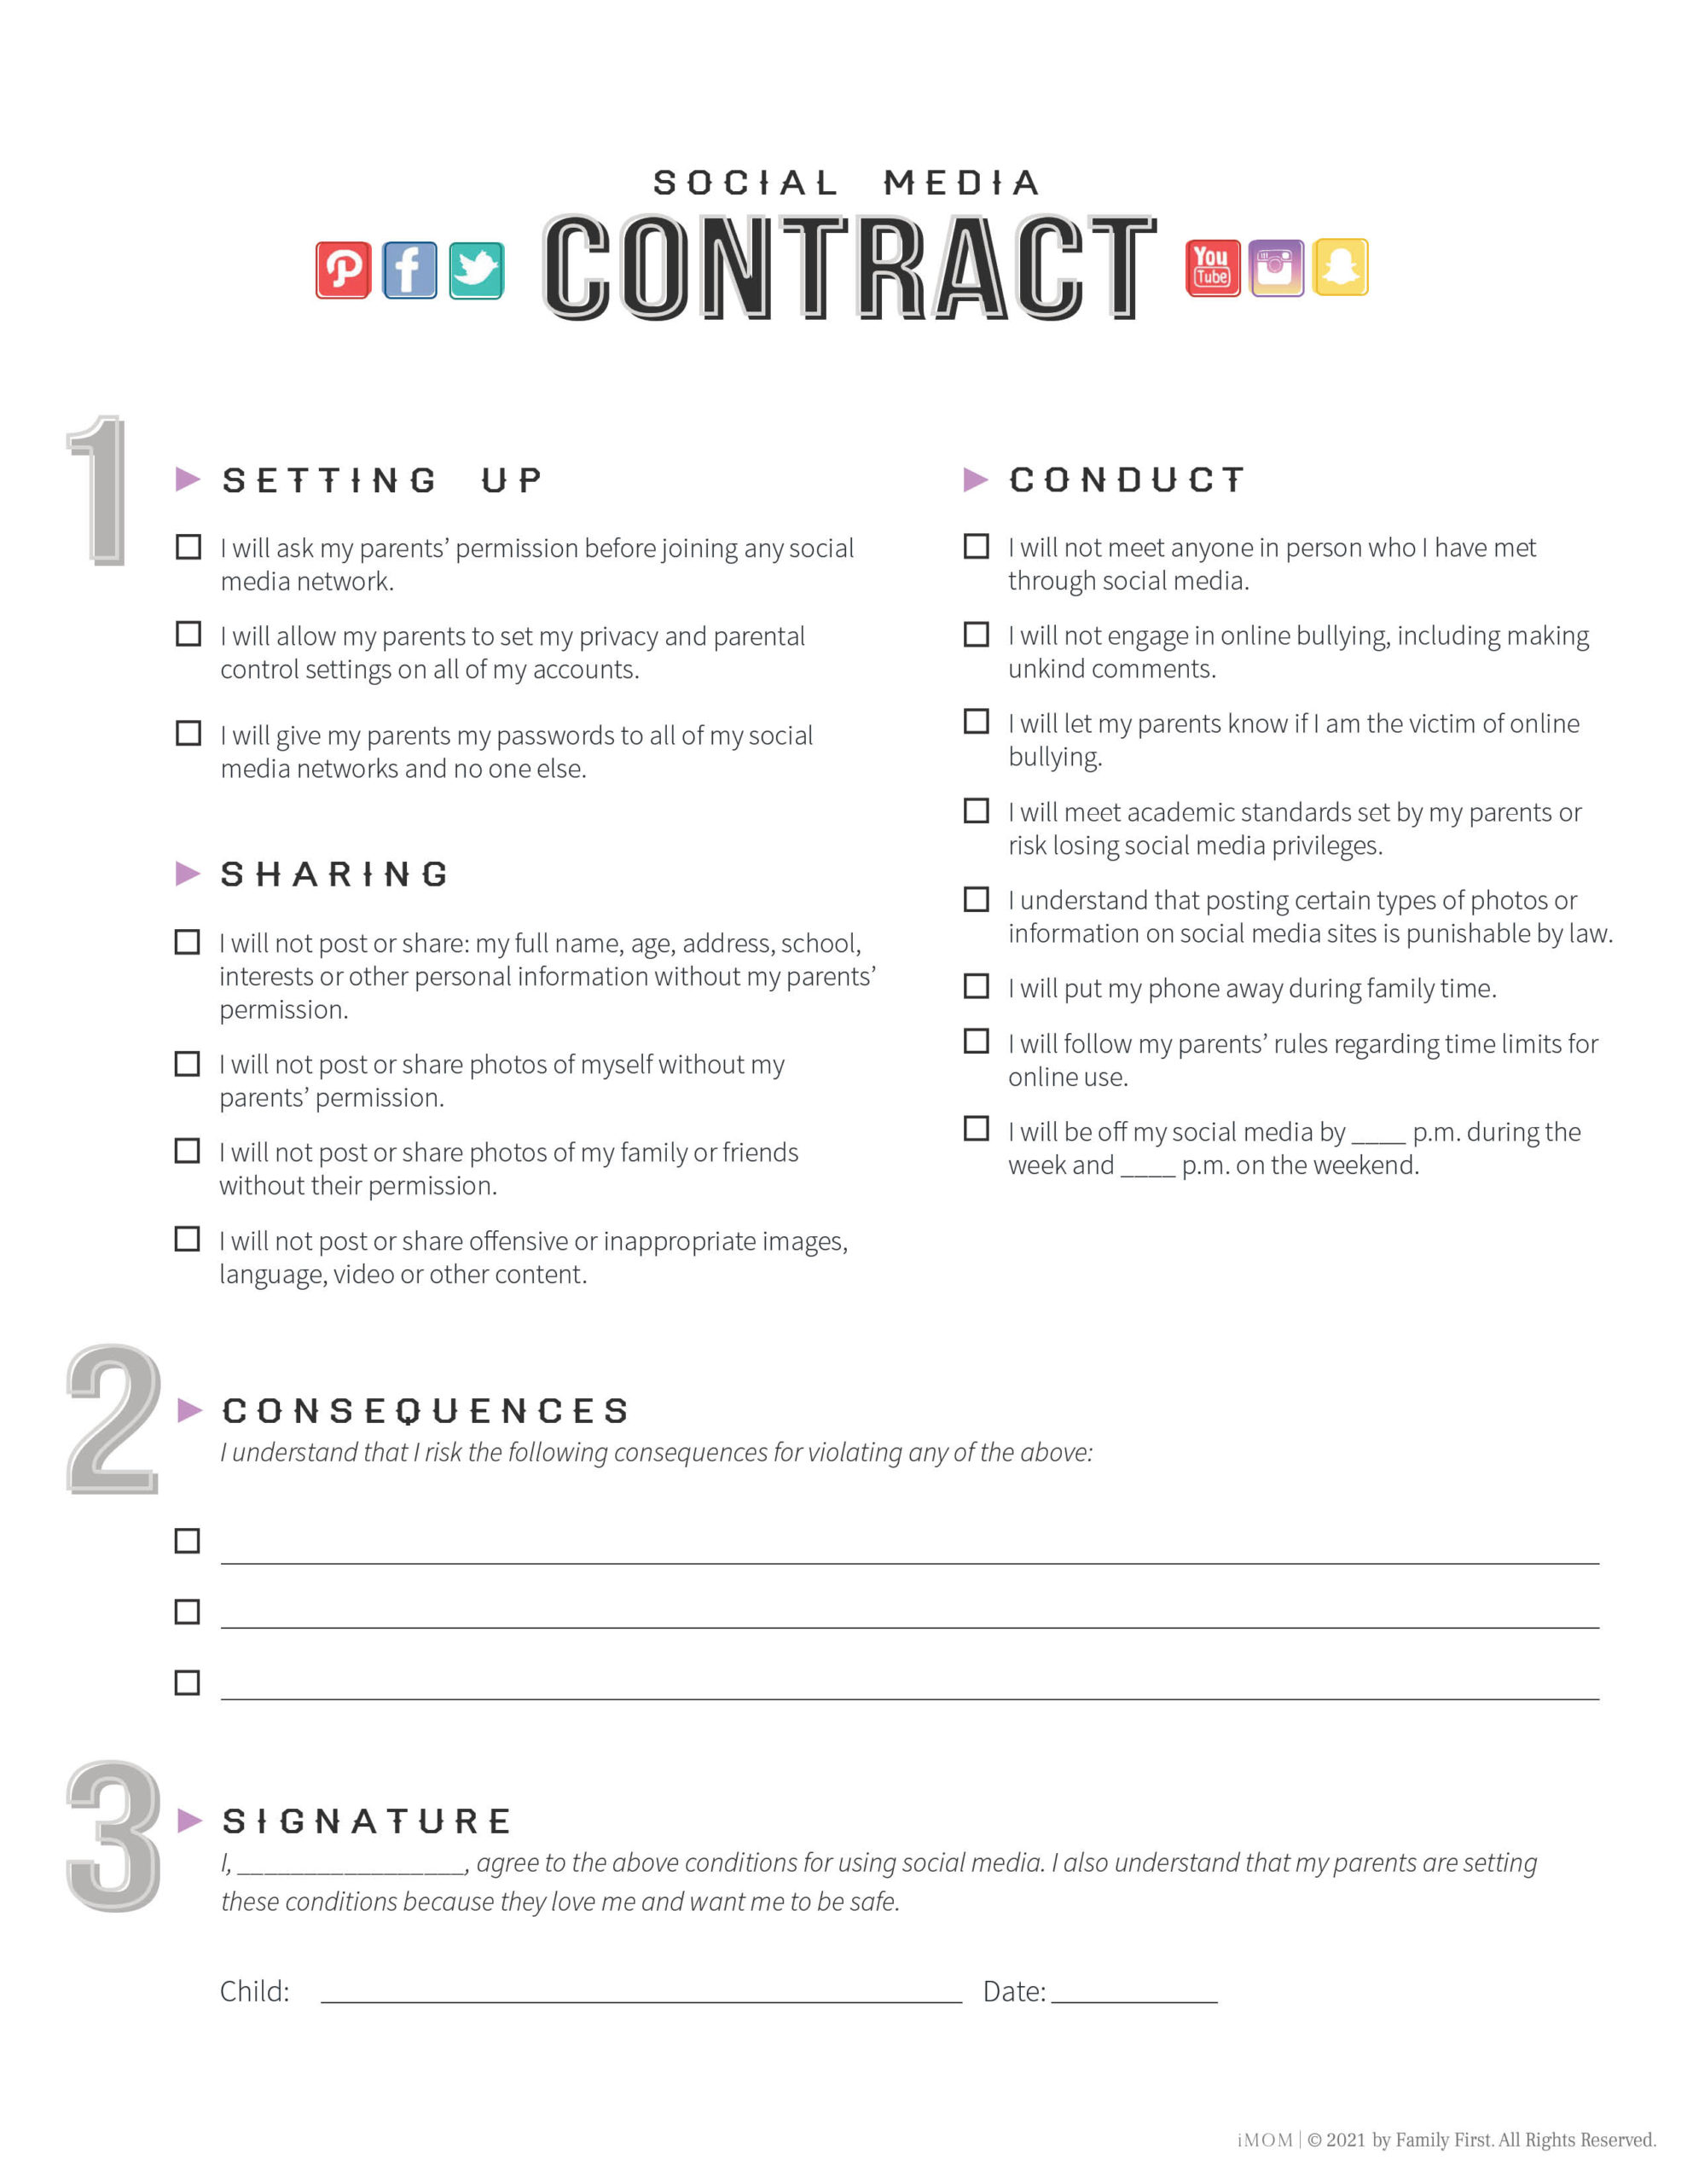 Marriage sex contract example